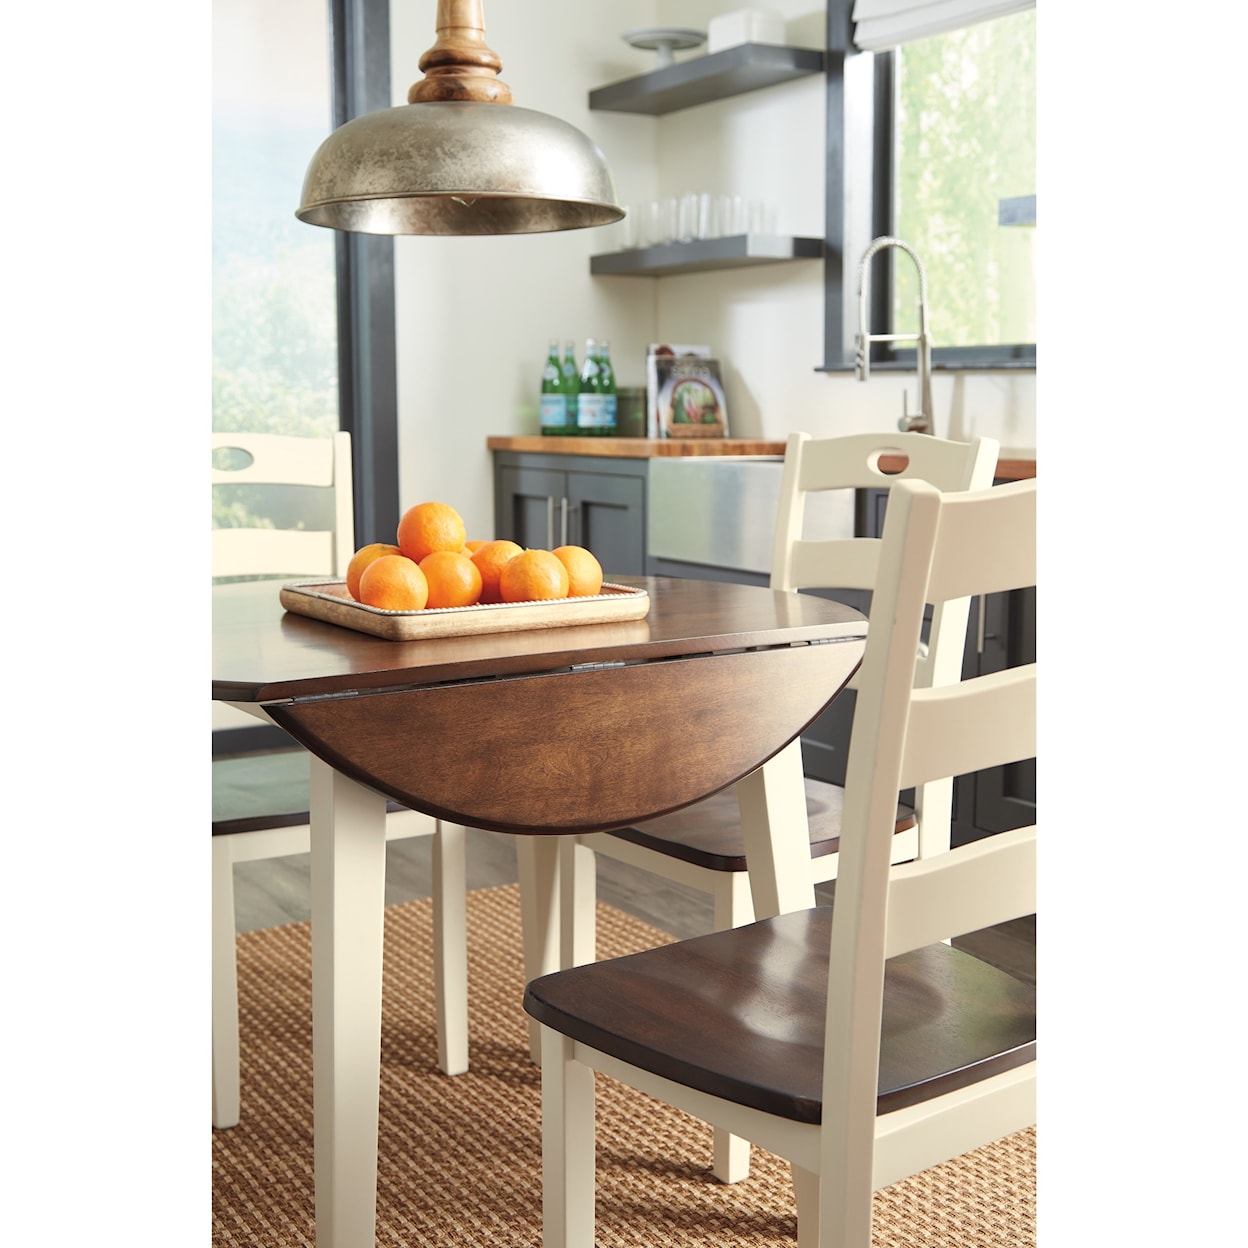 Signature Design by Ashley Brookfield Drop-Leaf Dining Table